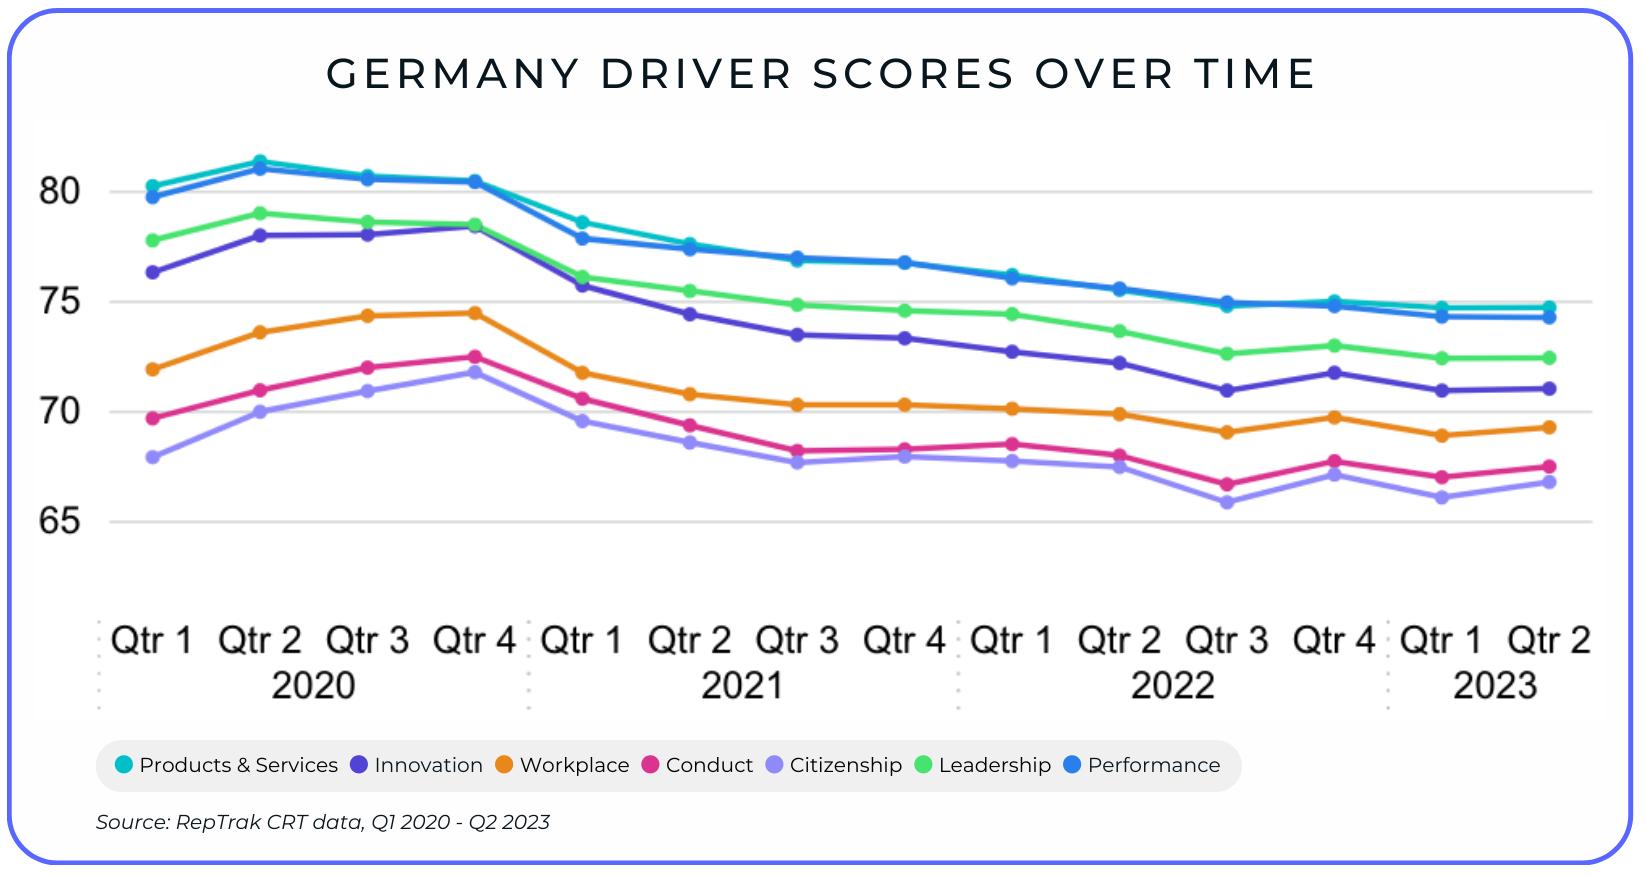 Germany Driver Scores over time